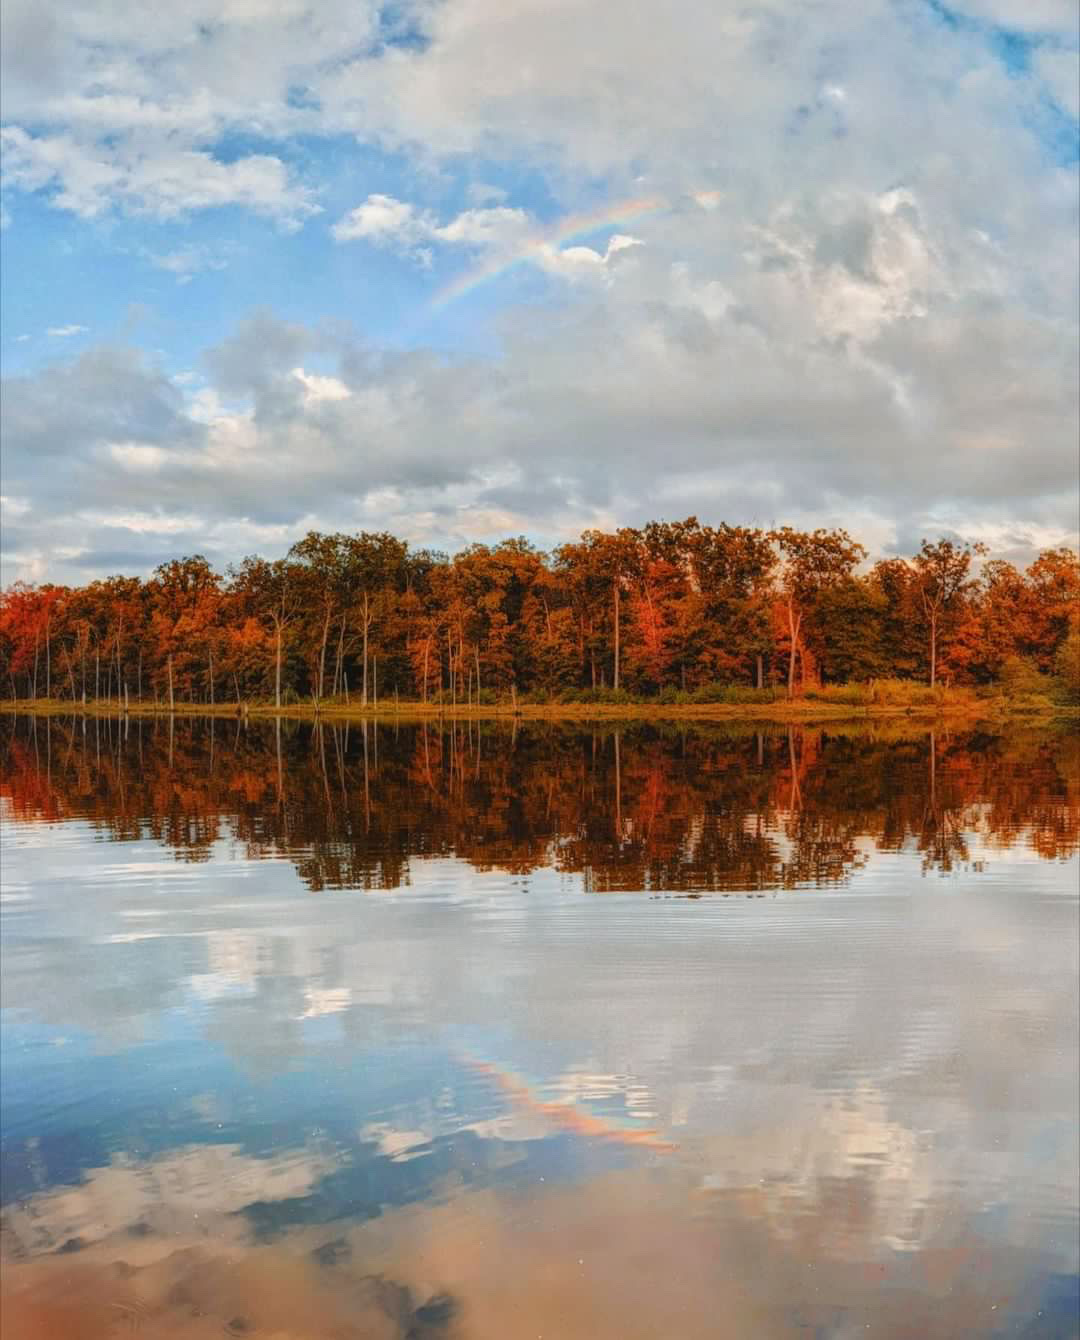 Fall trees reflect off of the lake with cloudy skies above.